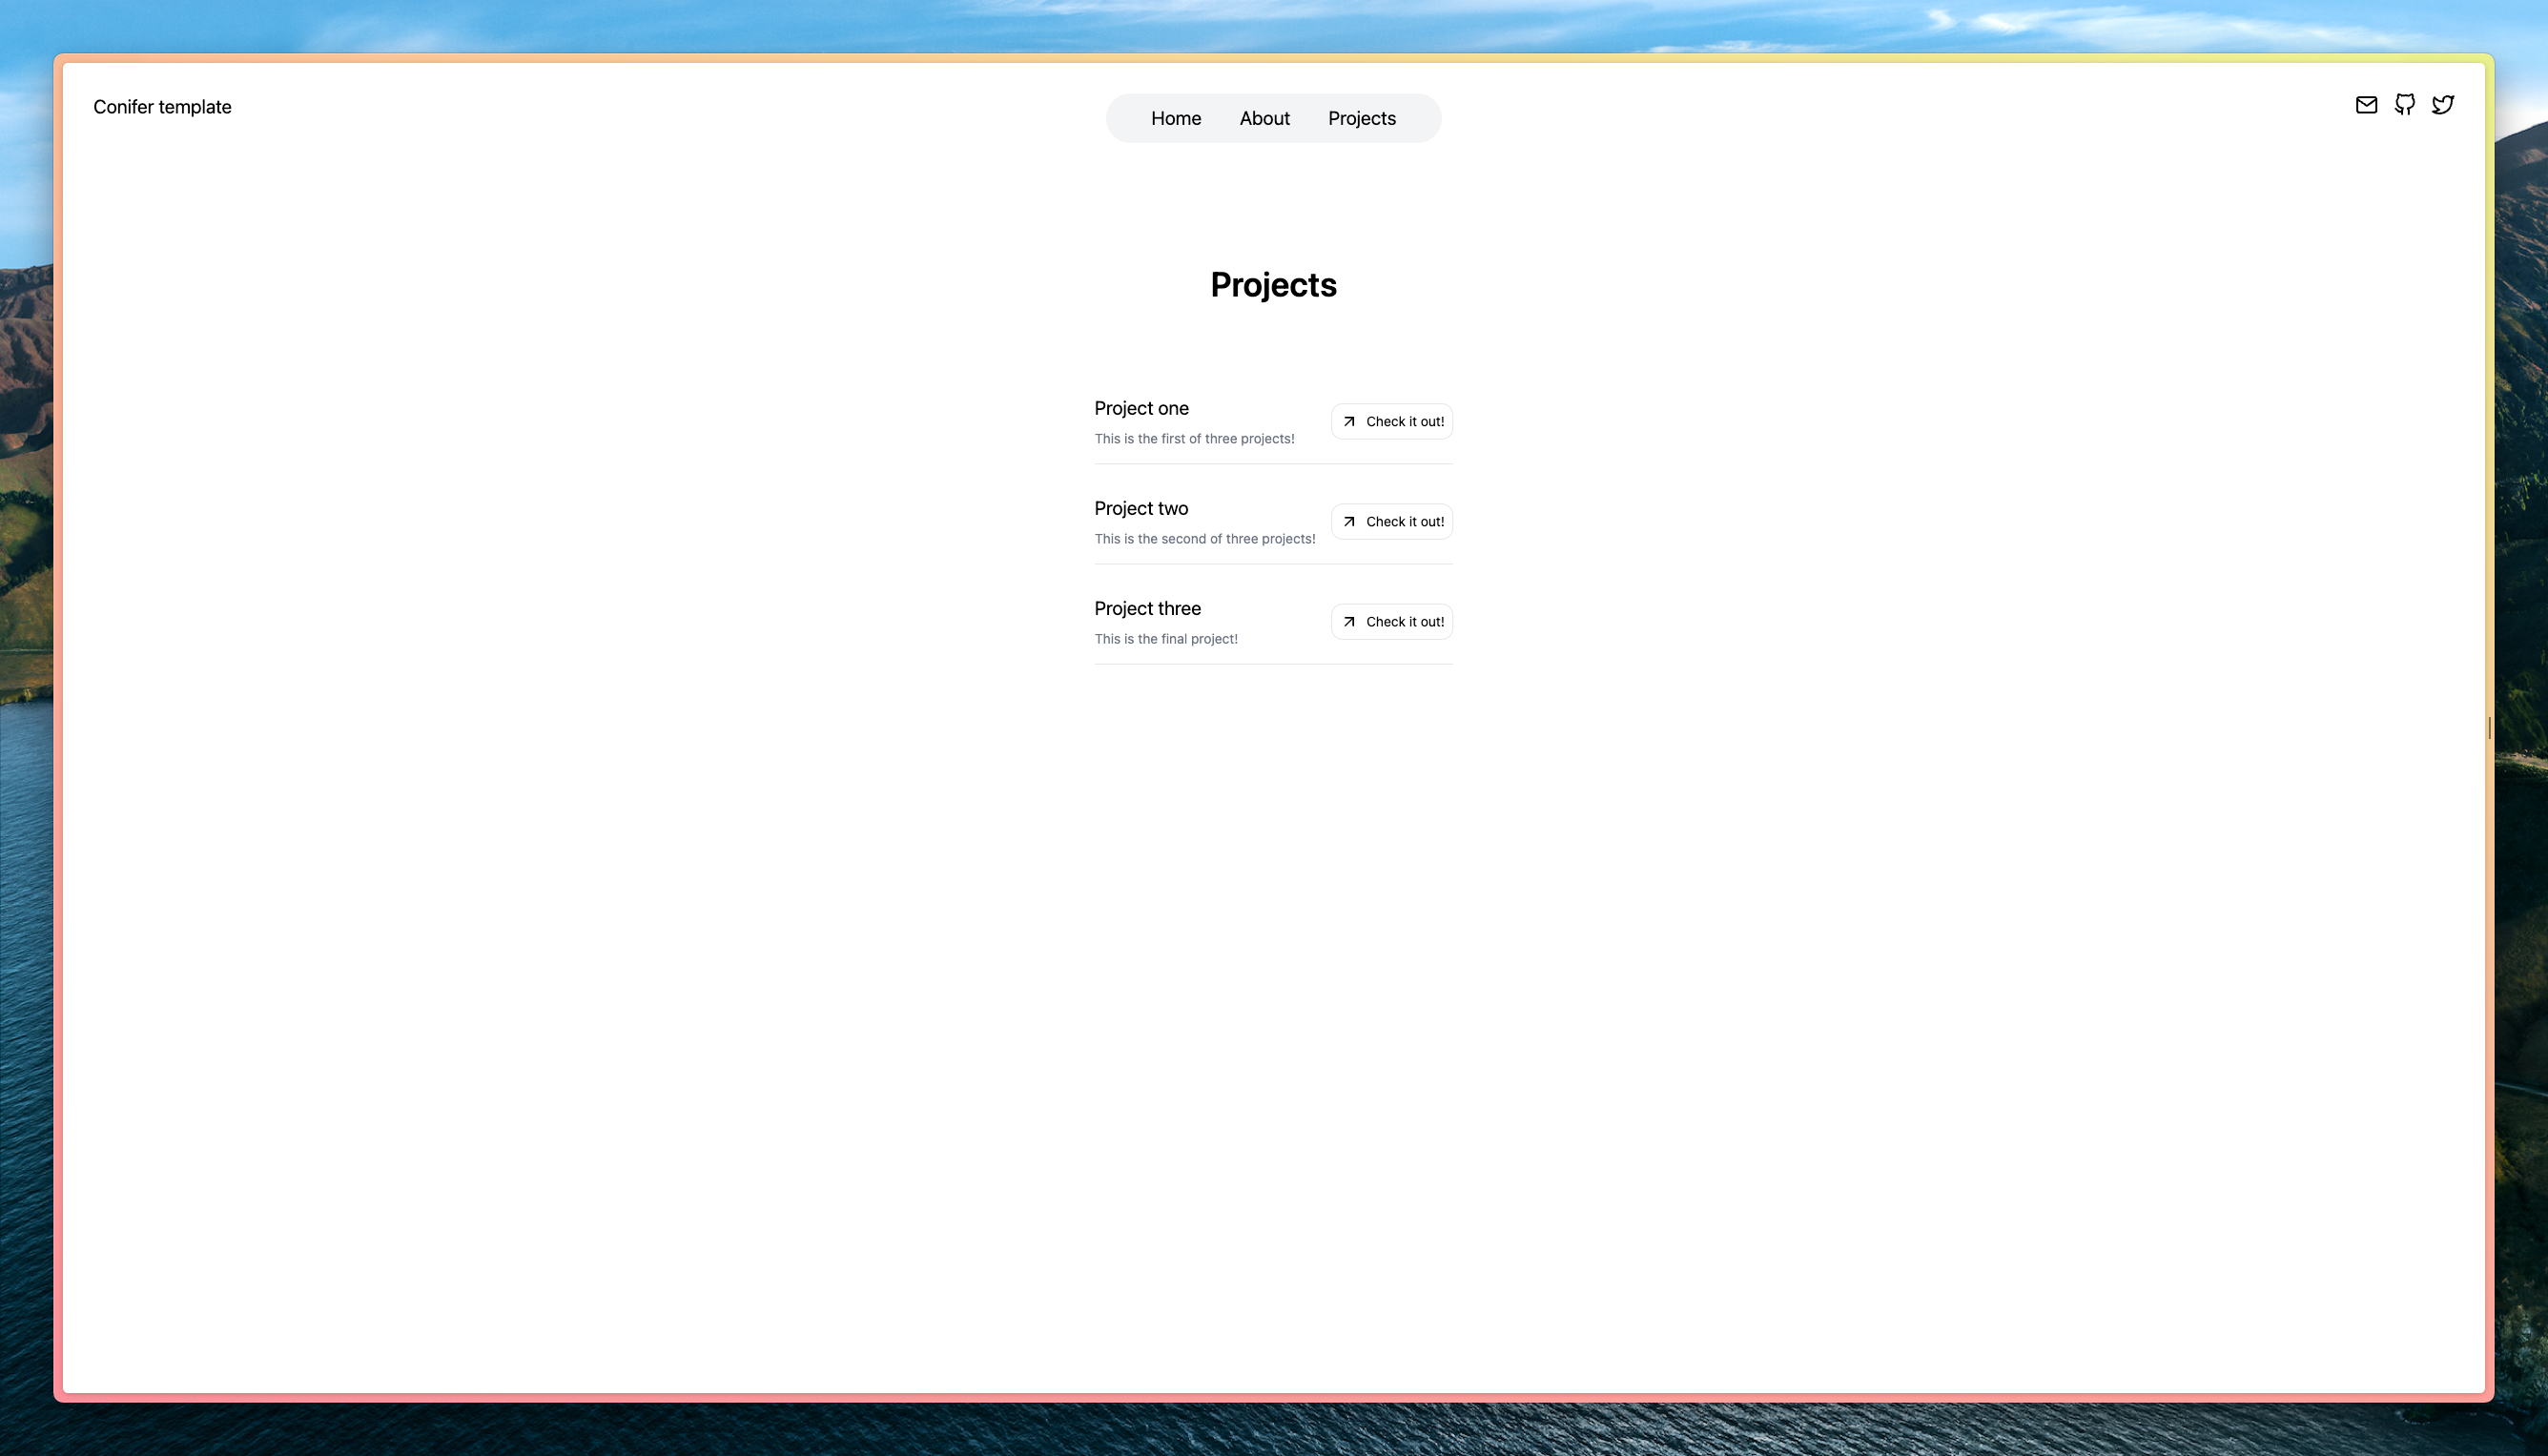 An example of the projects page